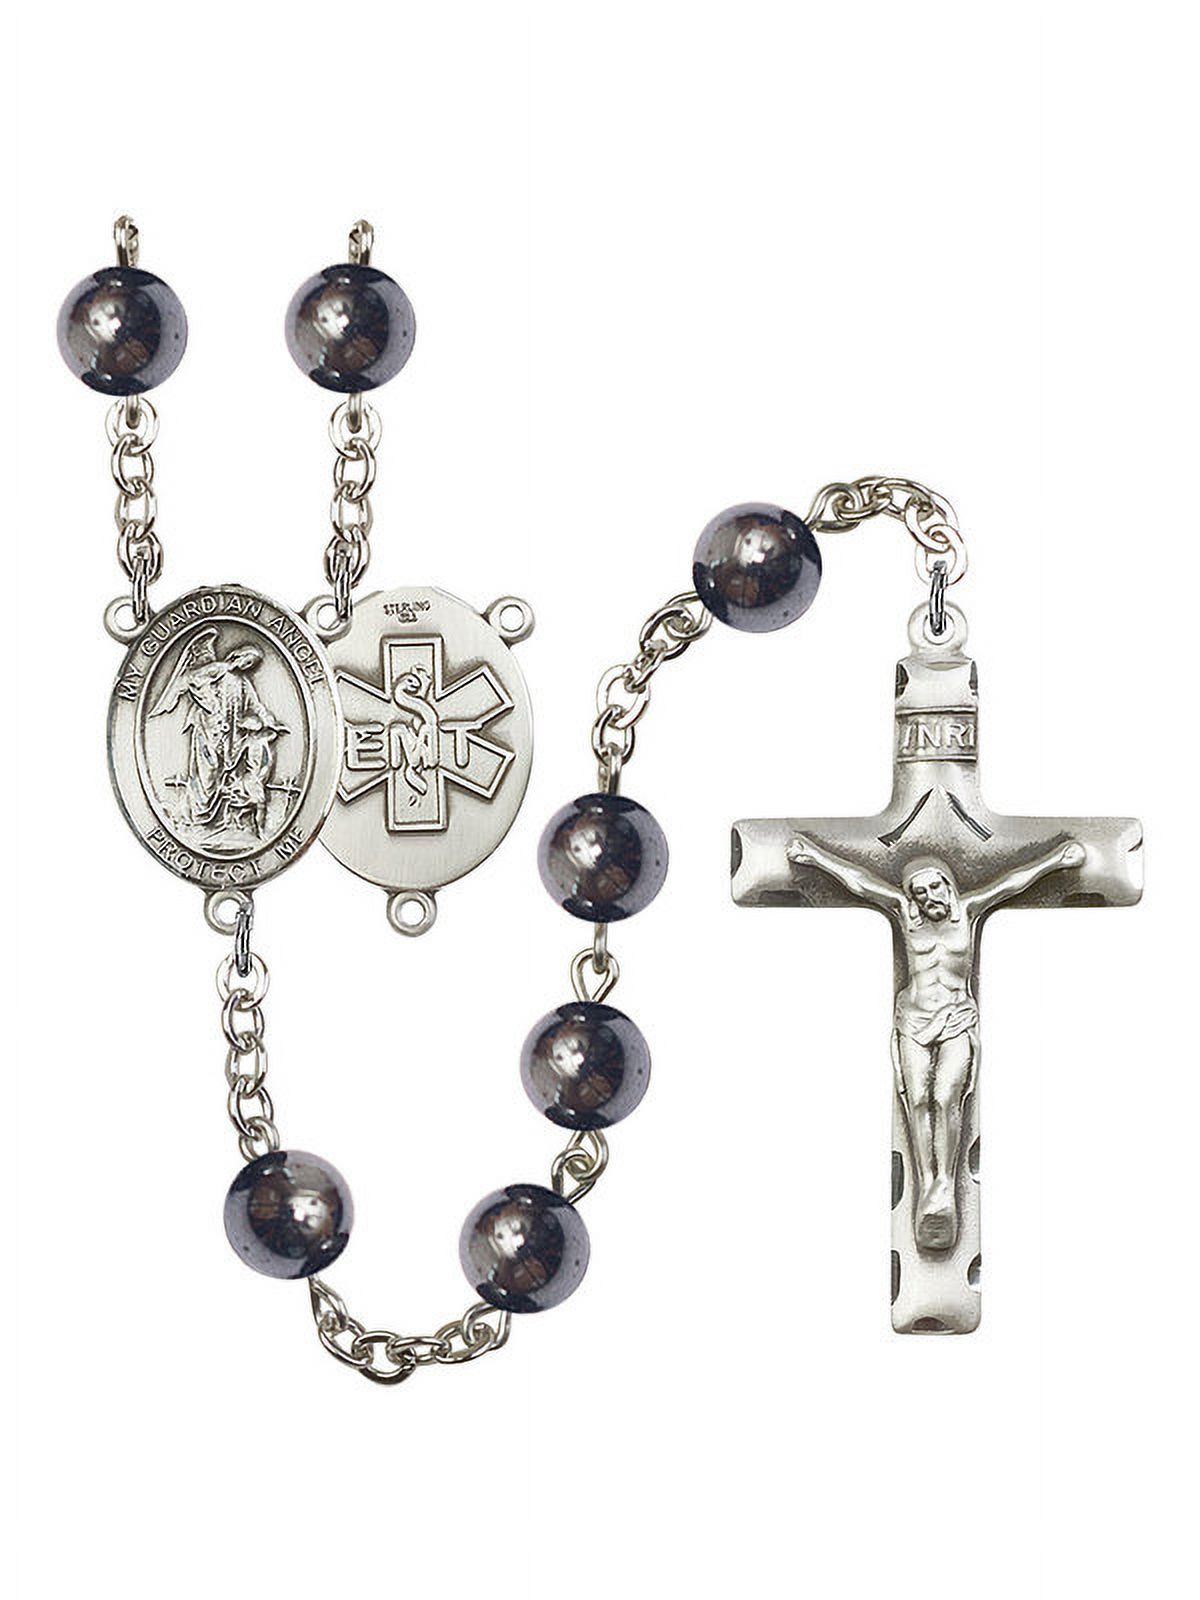 Guardian Angel / EMT Silver-Plated Rosary 8mm Hematite Beads Crucifix Size 1 3/4 x 1 Medal Charm, Adult Unisex, Grey Type